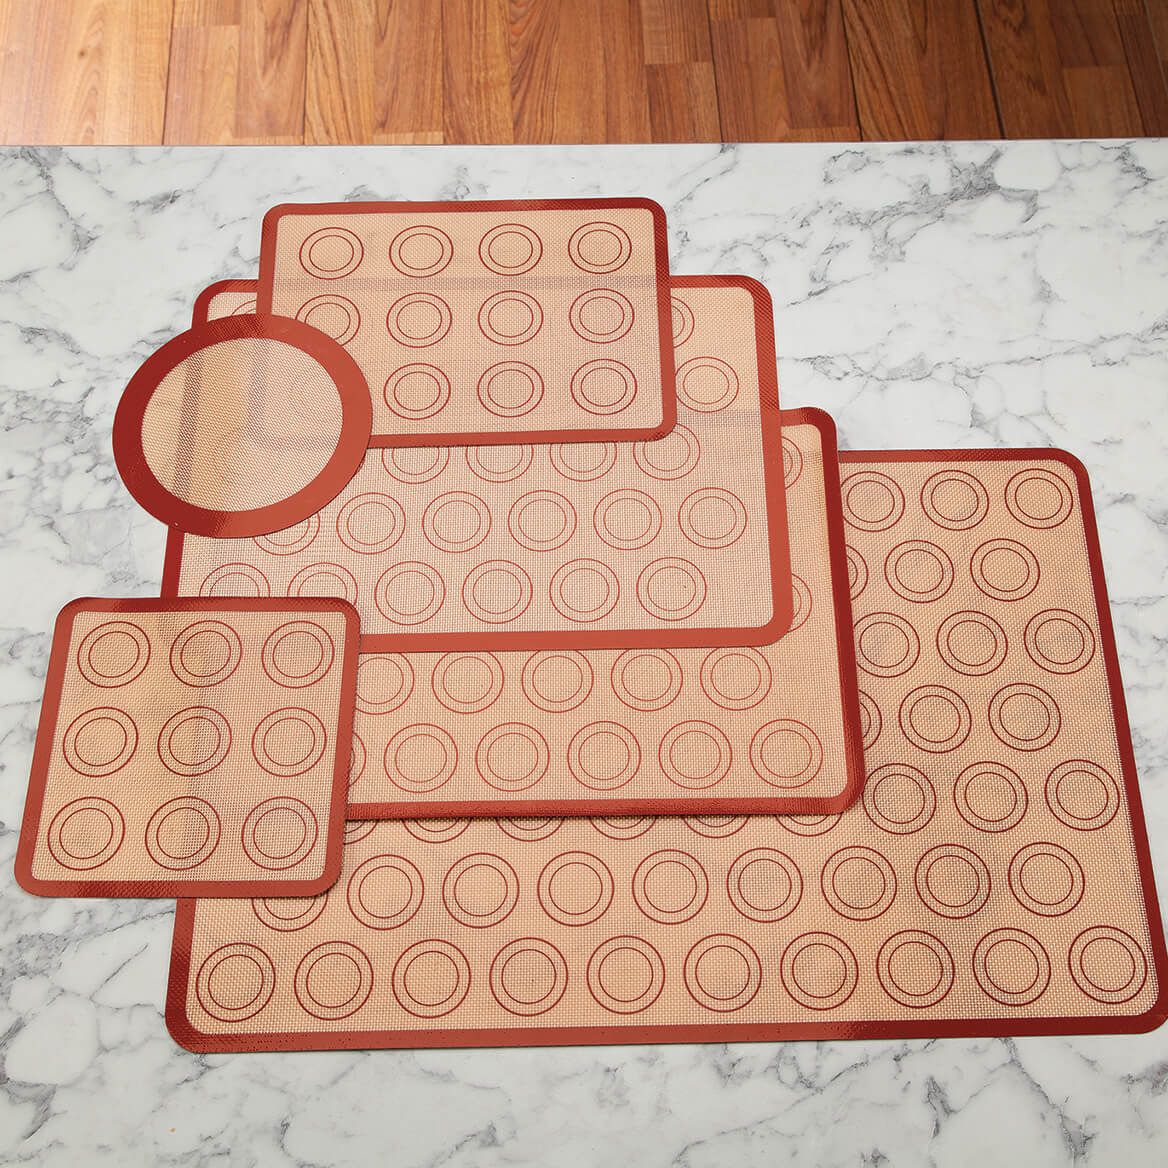 Silicone Baking Mats by Home Marketplace, Set of 6 + '-' + 374222